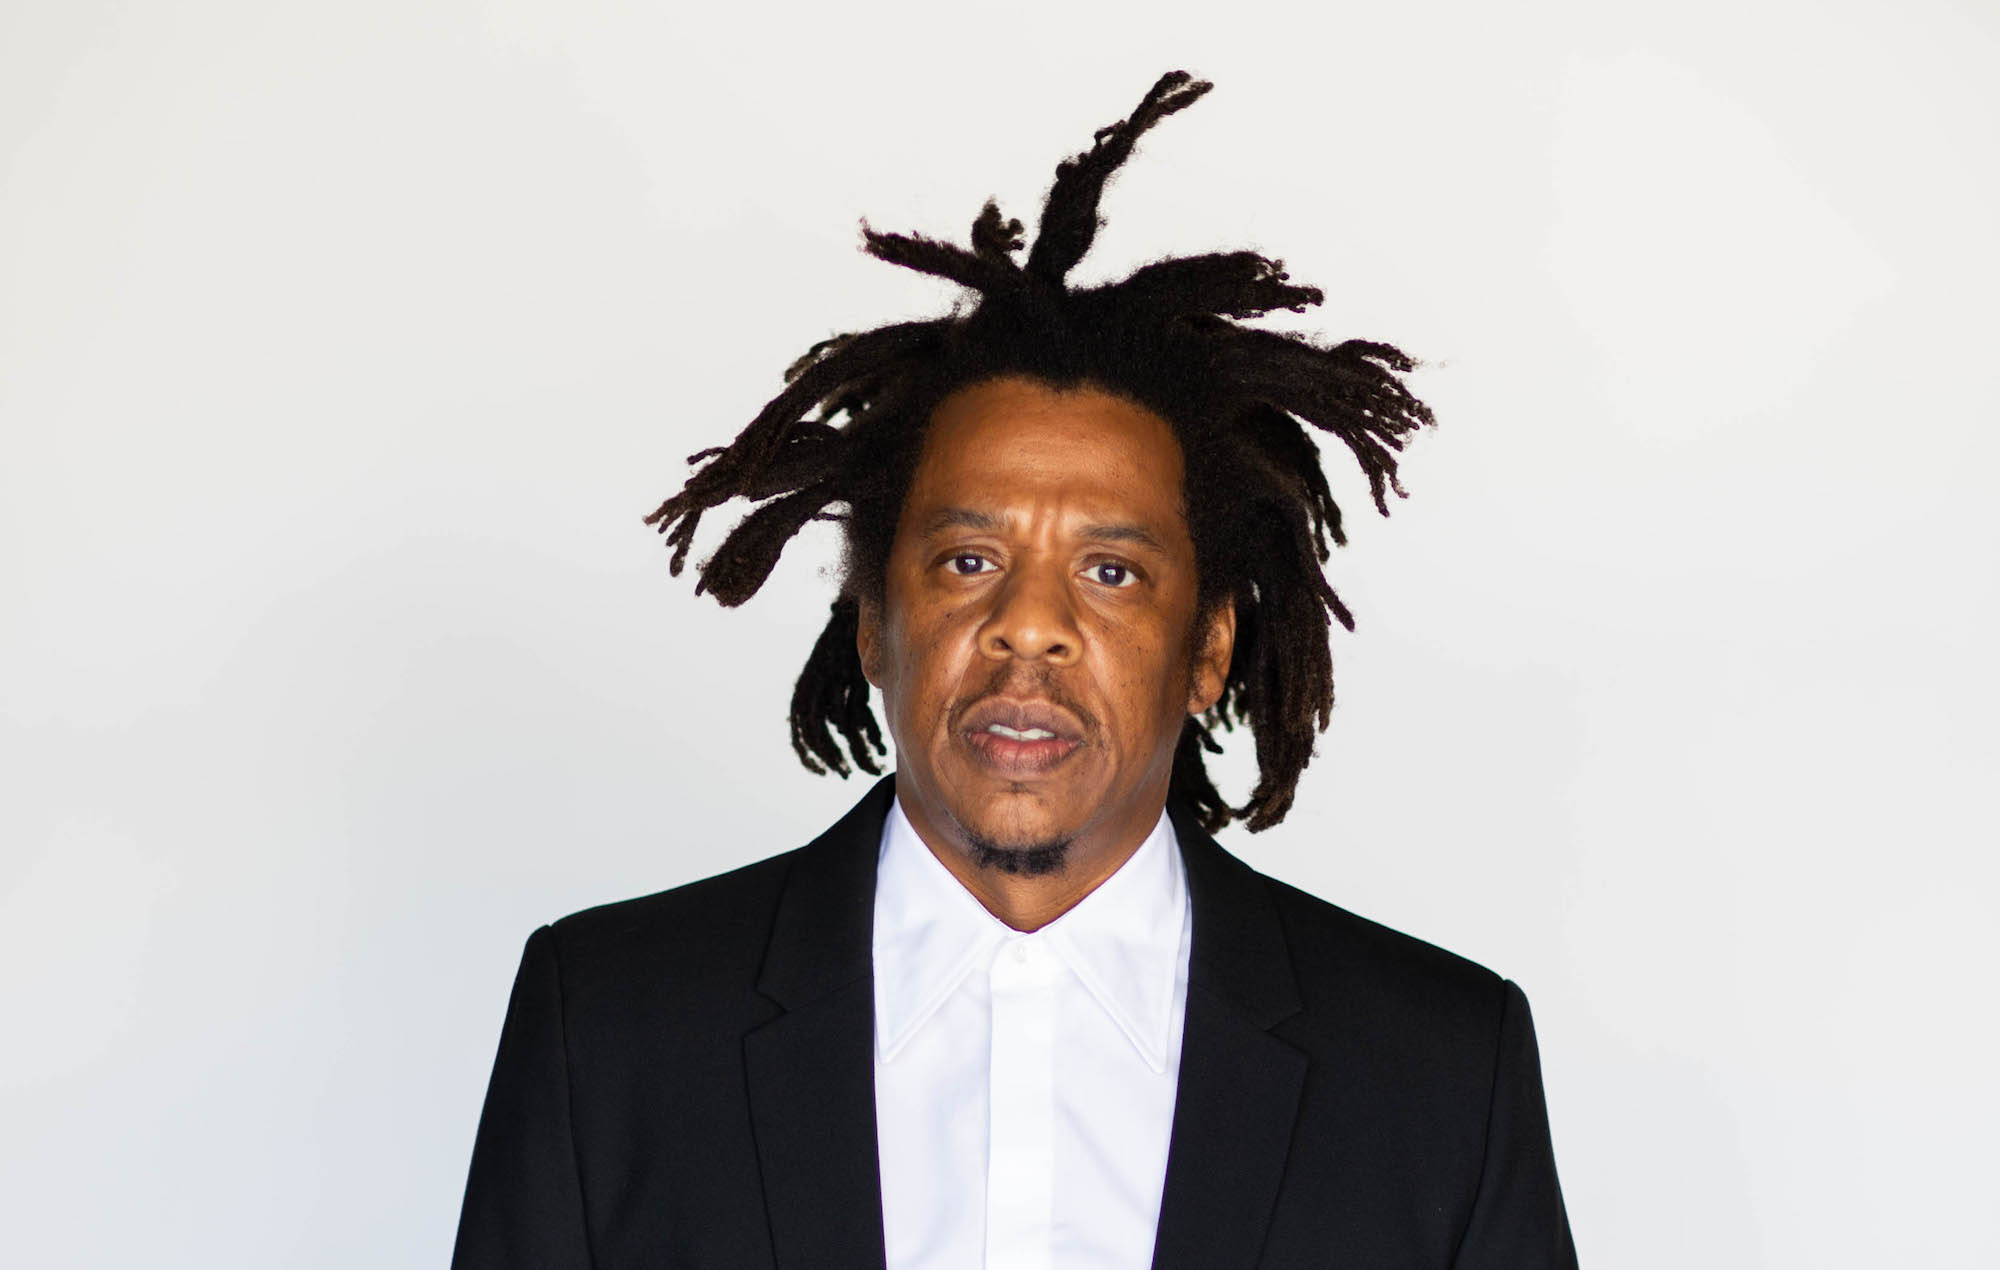 The World's richest musician and Rapper, Jay Z.